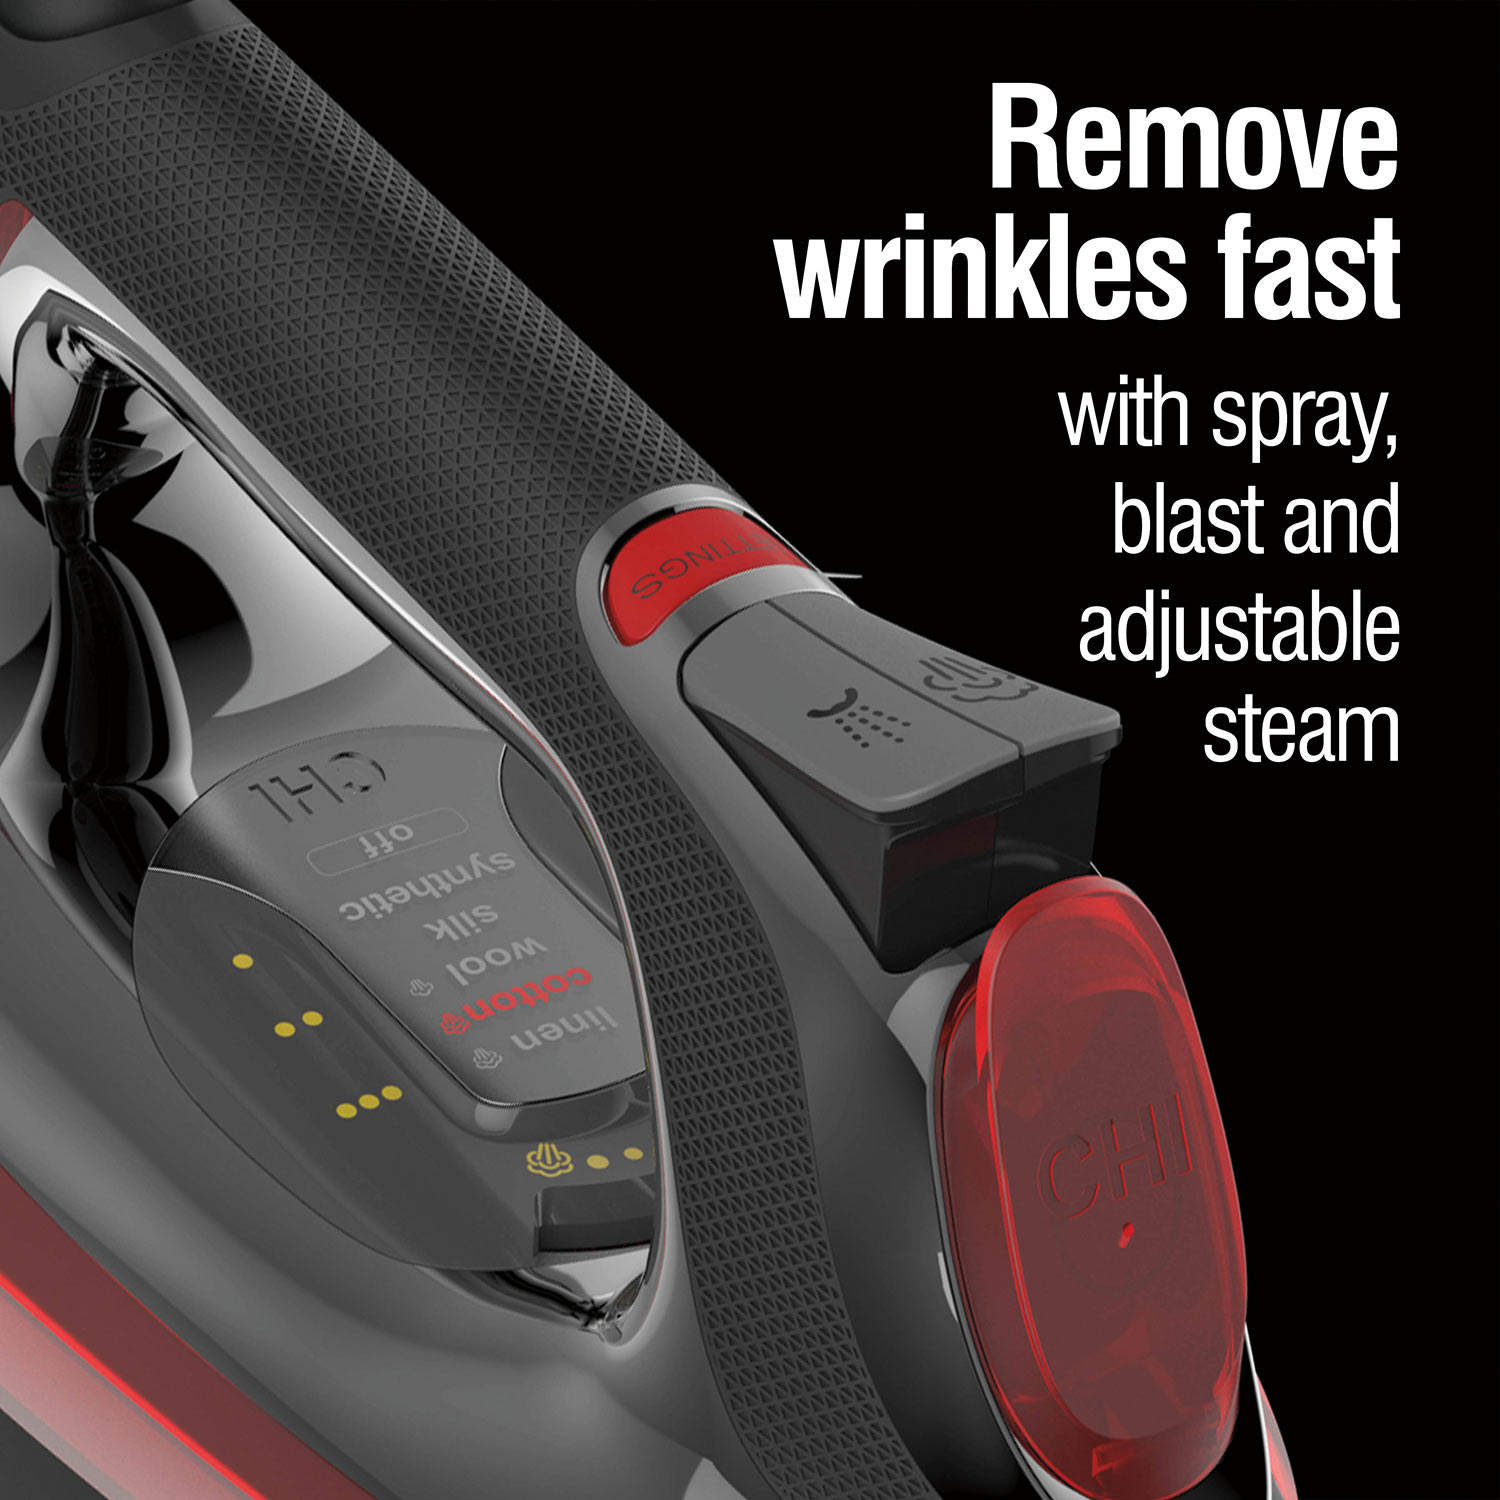 Removes wrinkles fast with spray, blast and adjustable steam